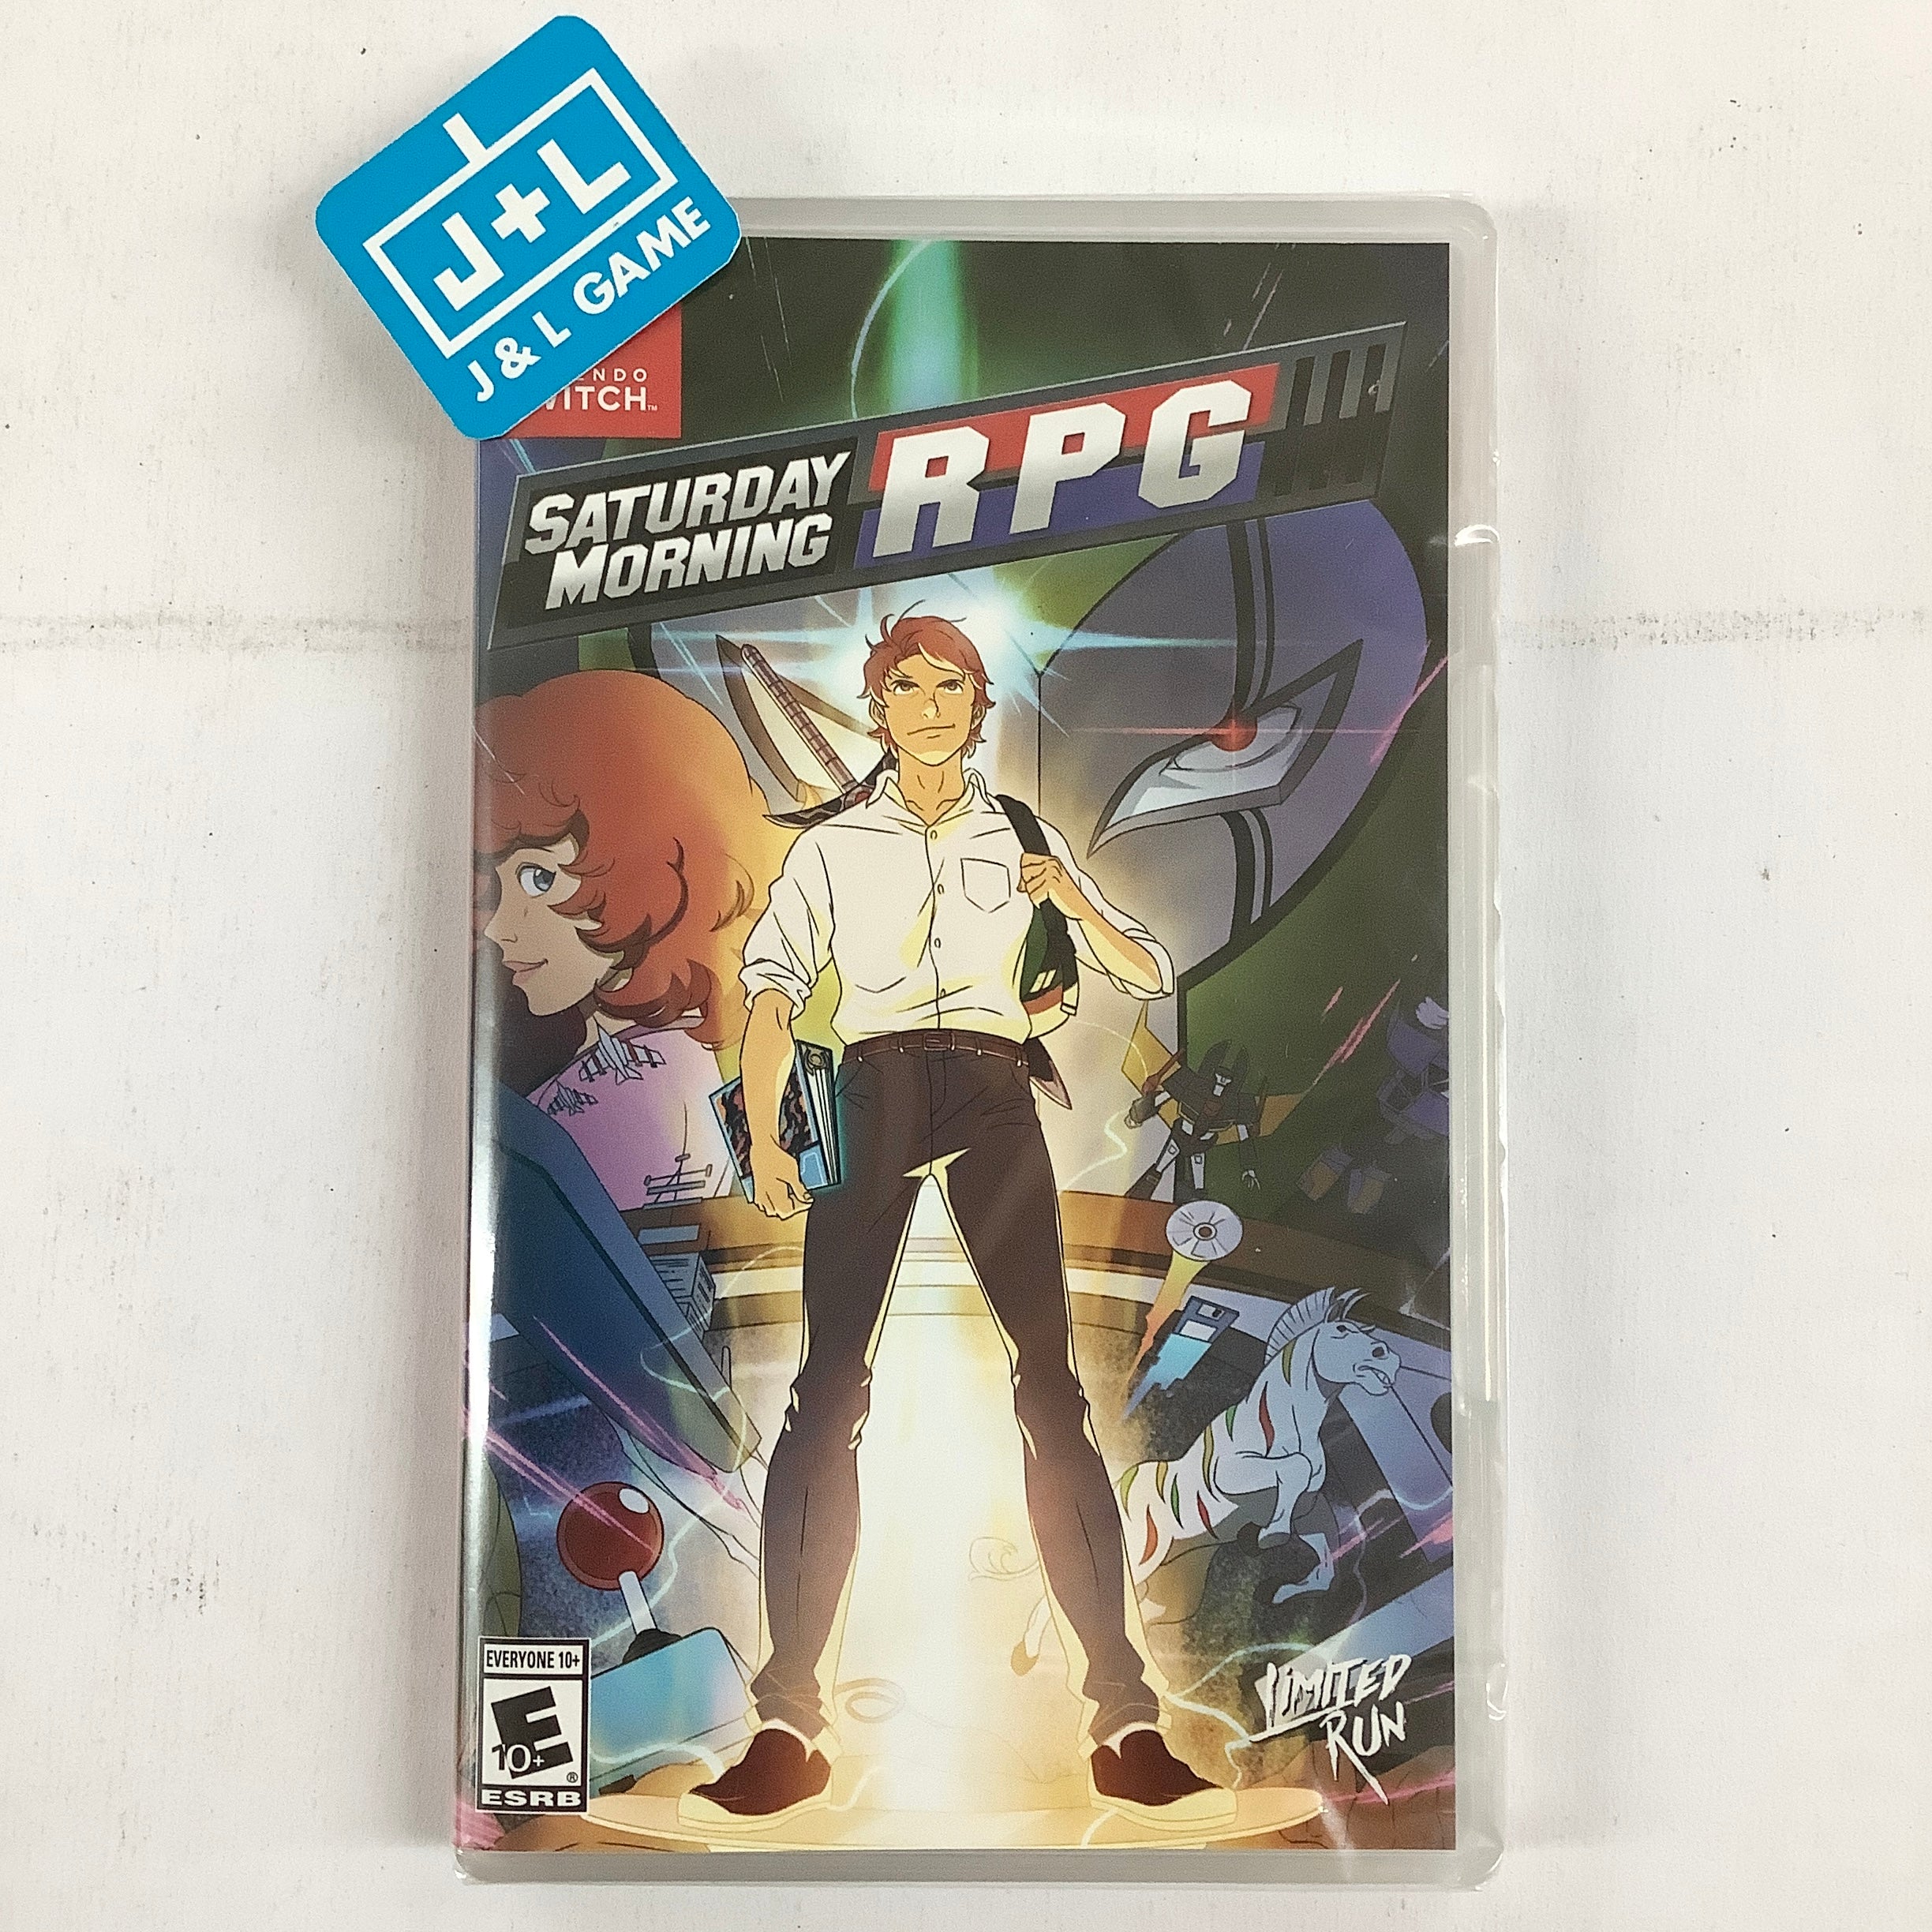 Saturday Morning RPG (Limited Run #005) - (NSW) Nintendo Switch Video Games Limited Run Games   